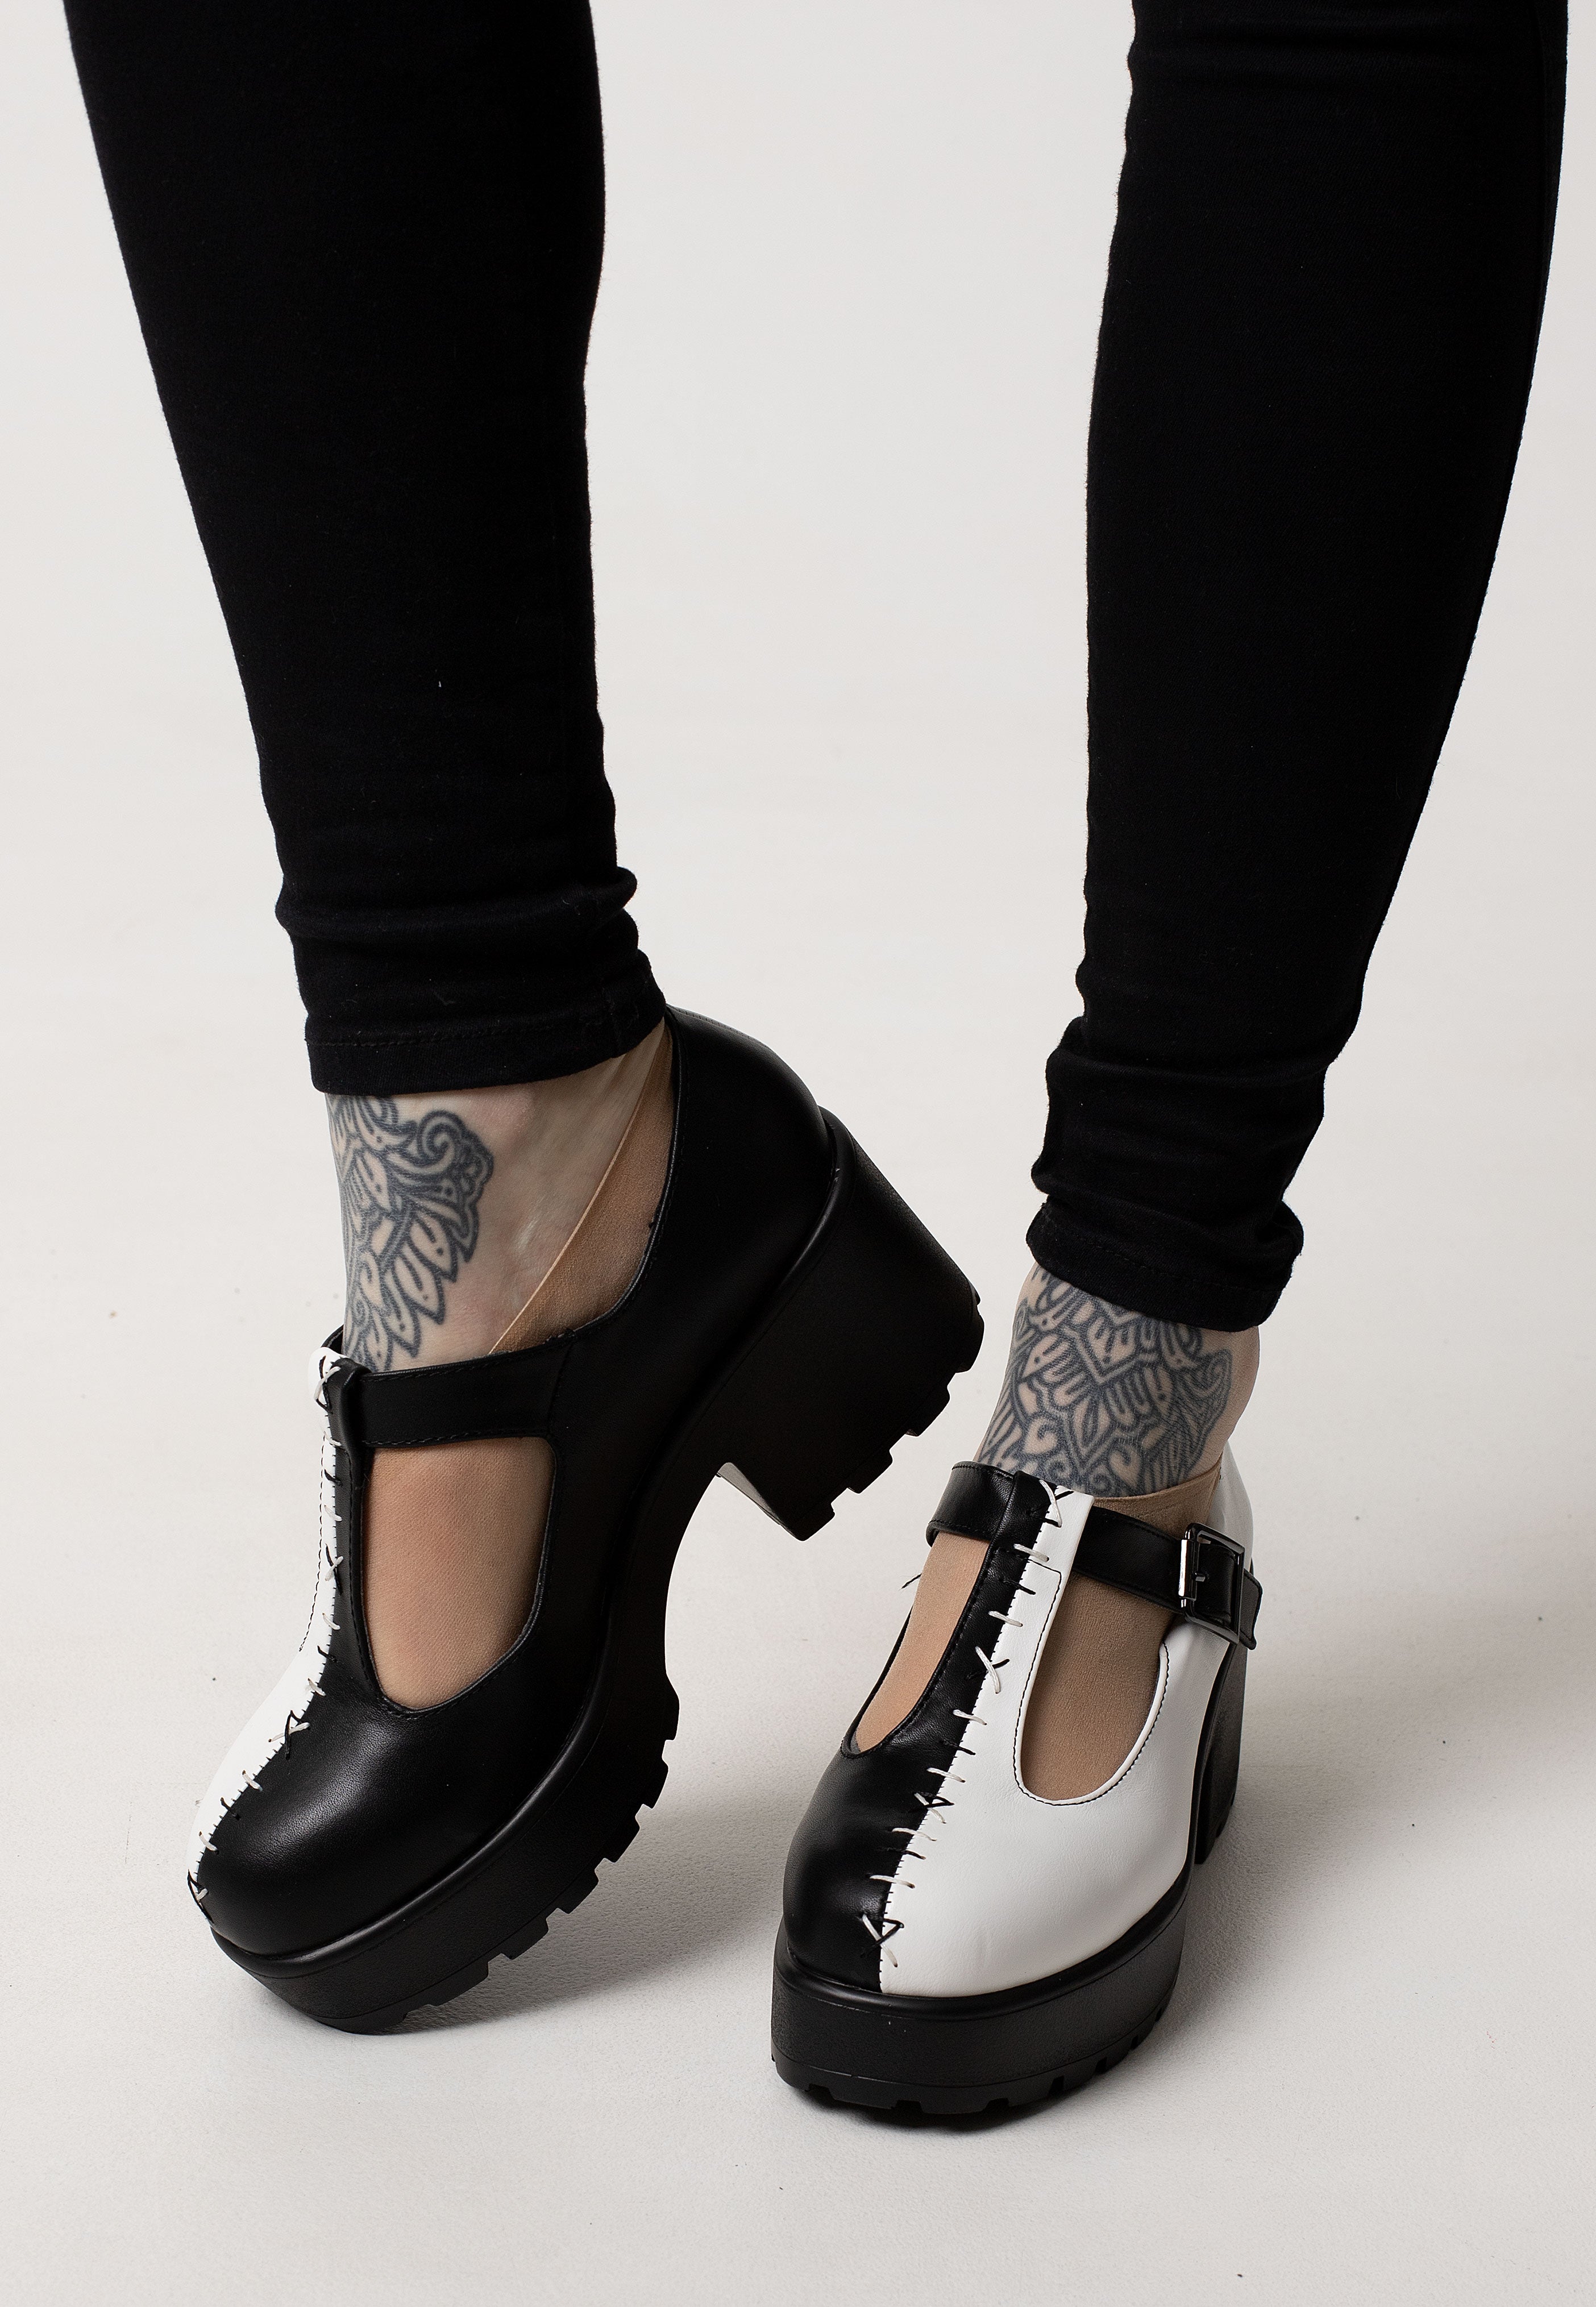 Koi Footwear - Tira Mary Janes ‘Dead Or Alive Edition’ Black/White - Girl Shoes